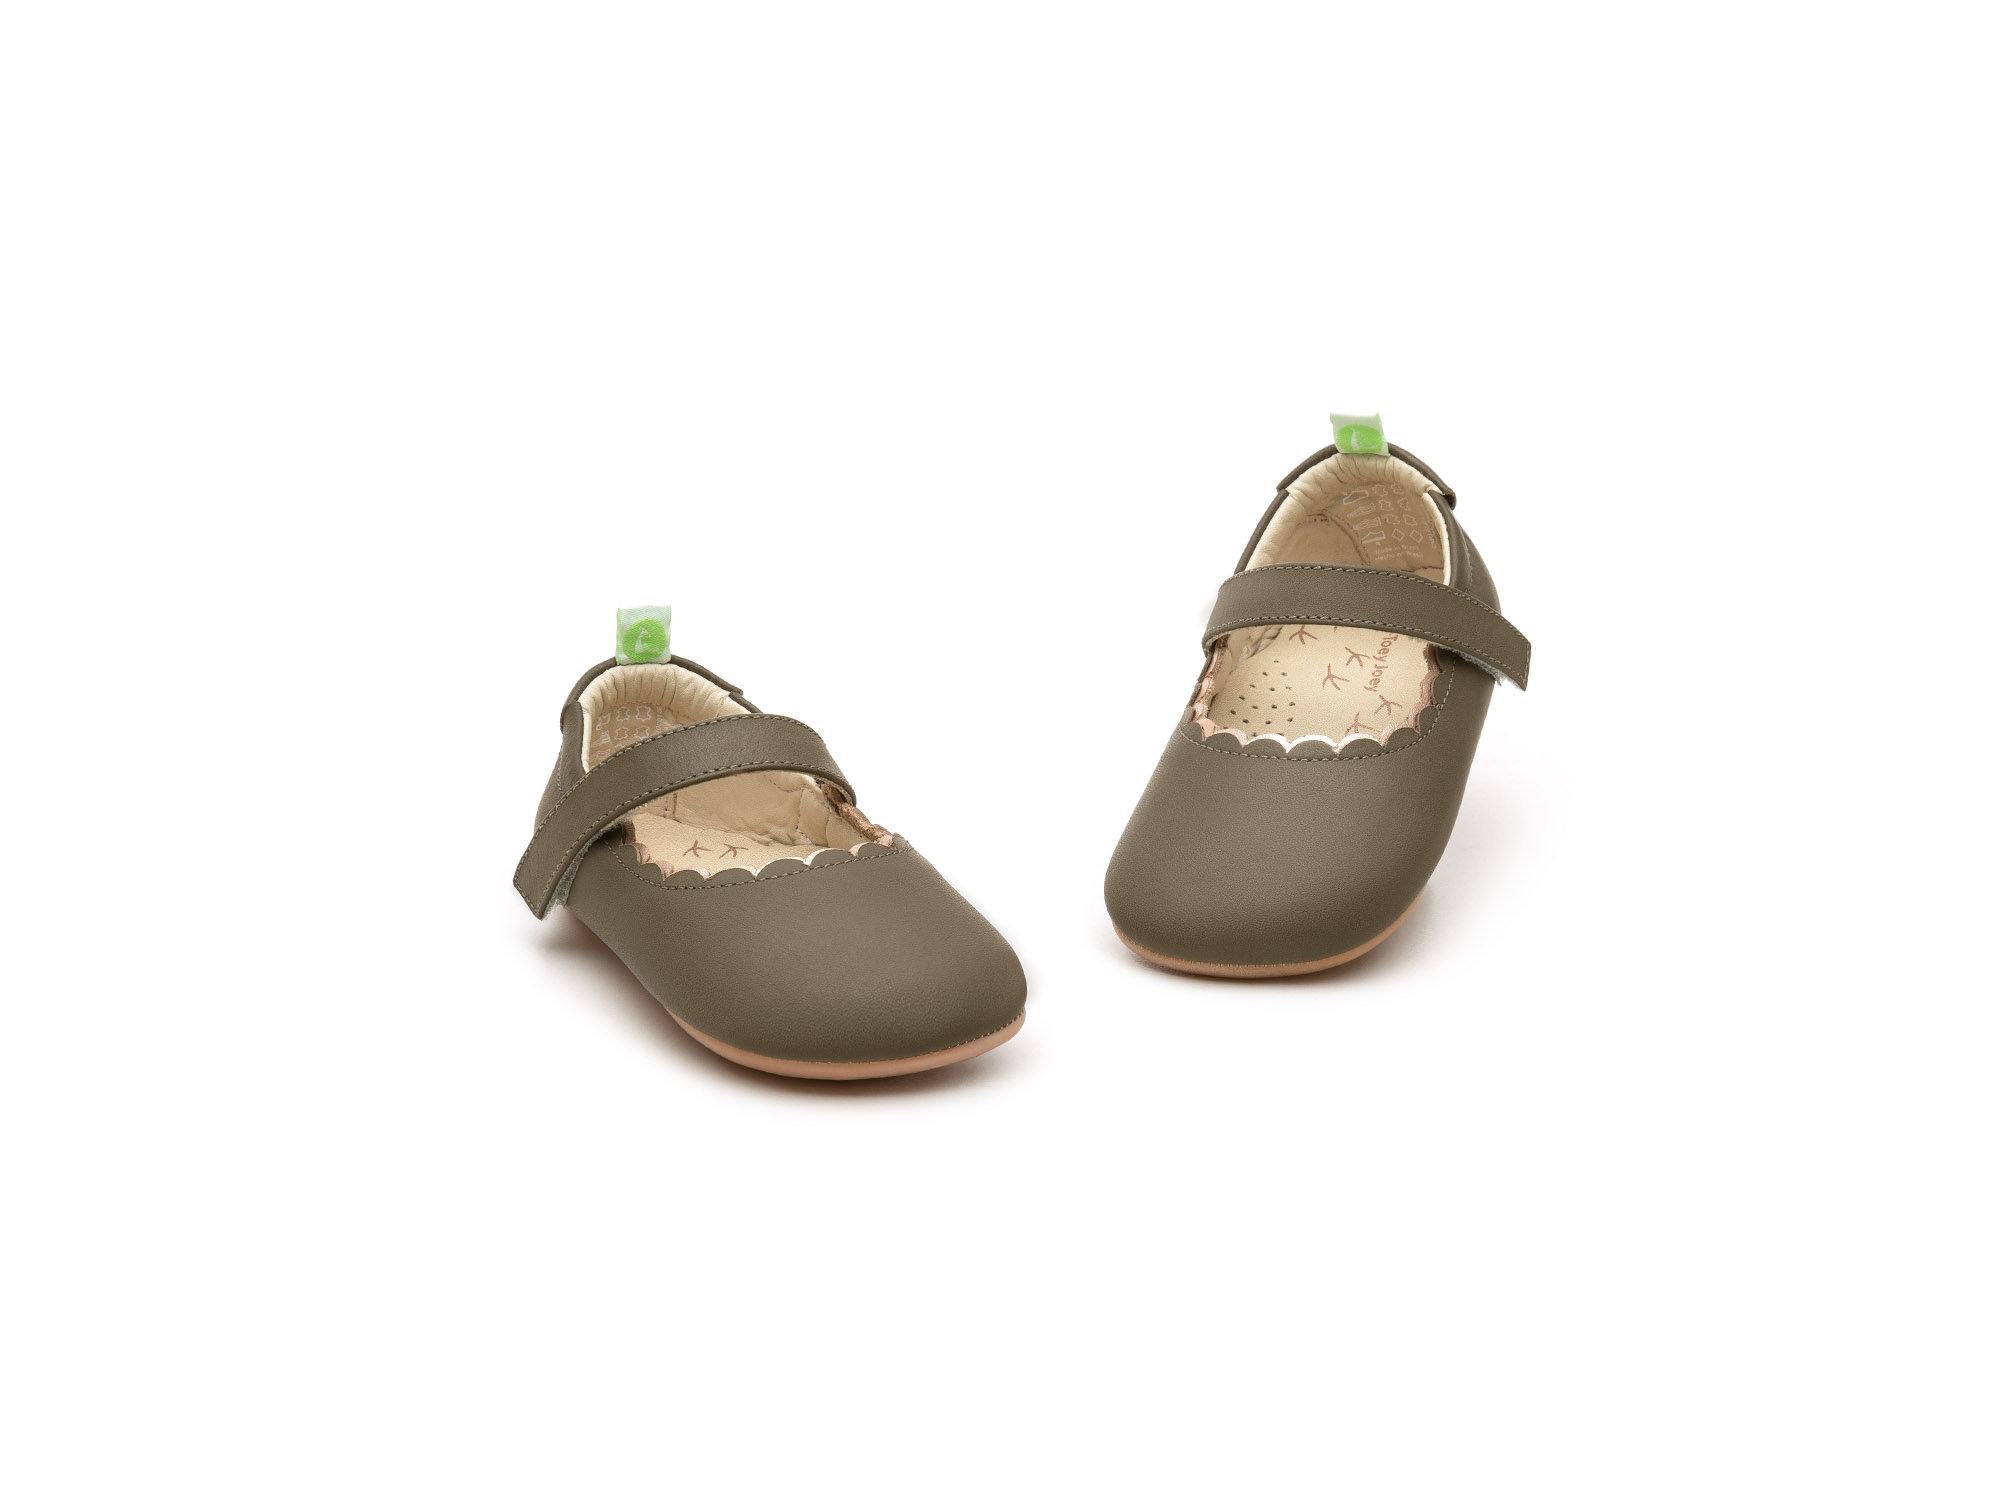 UP & GO Mary Janes for Girls Roundy | Tip Toey Joey - Australia - 3